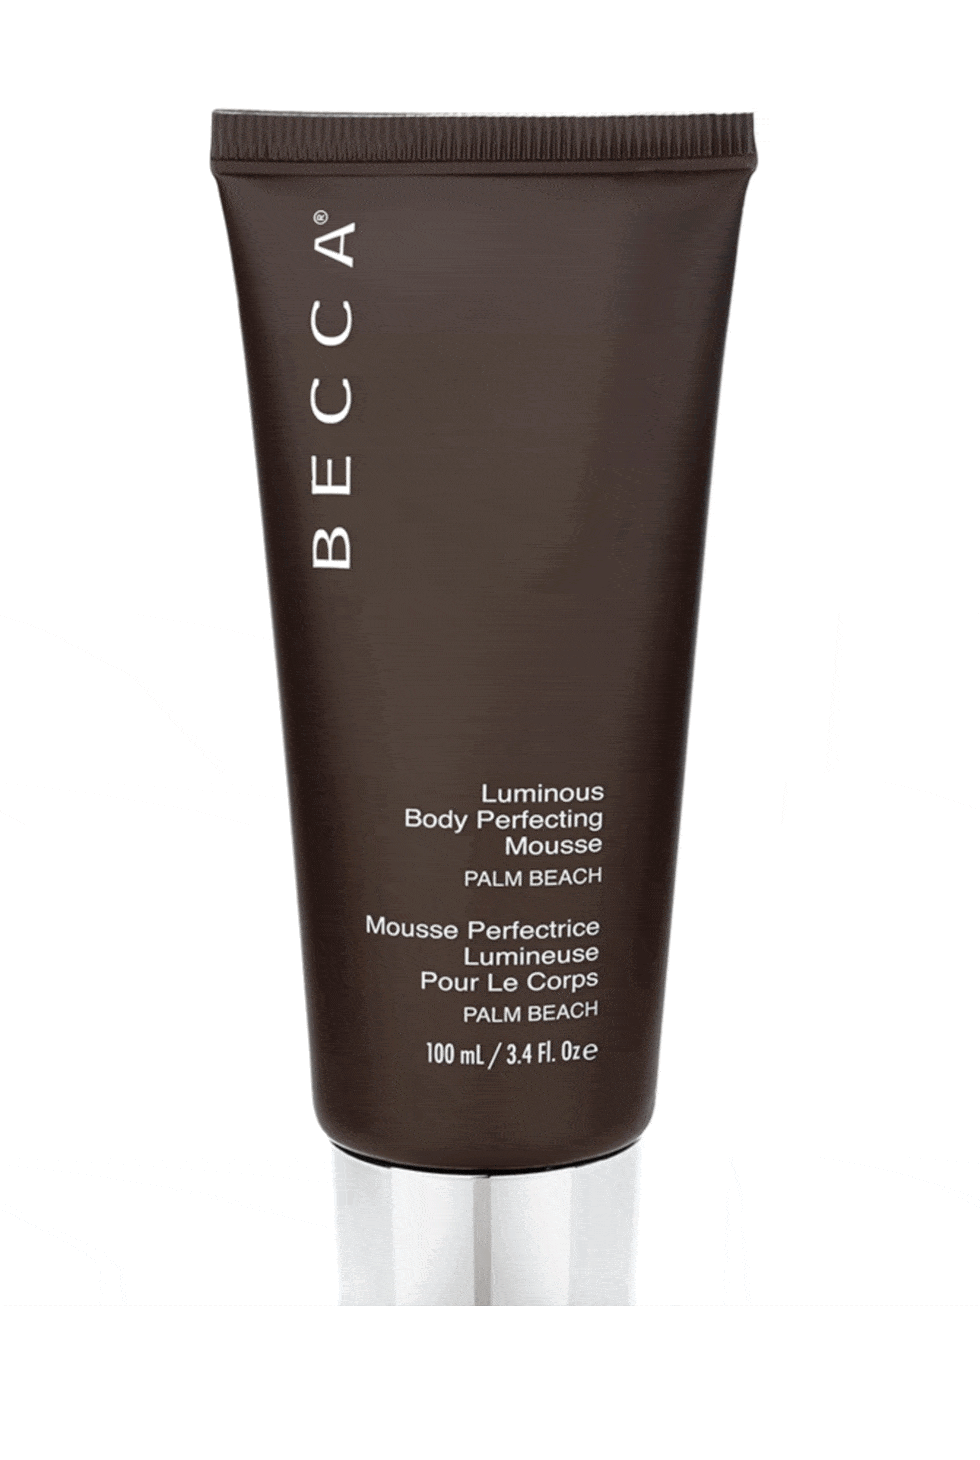 <p>Becca</p>

<p>&quot;The whole philosophy of BECCA is about creating a natural, flawless look. It&#39;s really about skin looking amazing - everything else is secondary,&quot; says&nbsp;Australian make-up artist and founder, Rebecca Morrice Williams.</p